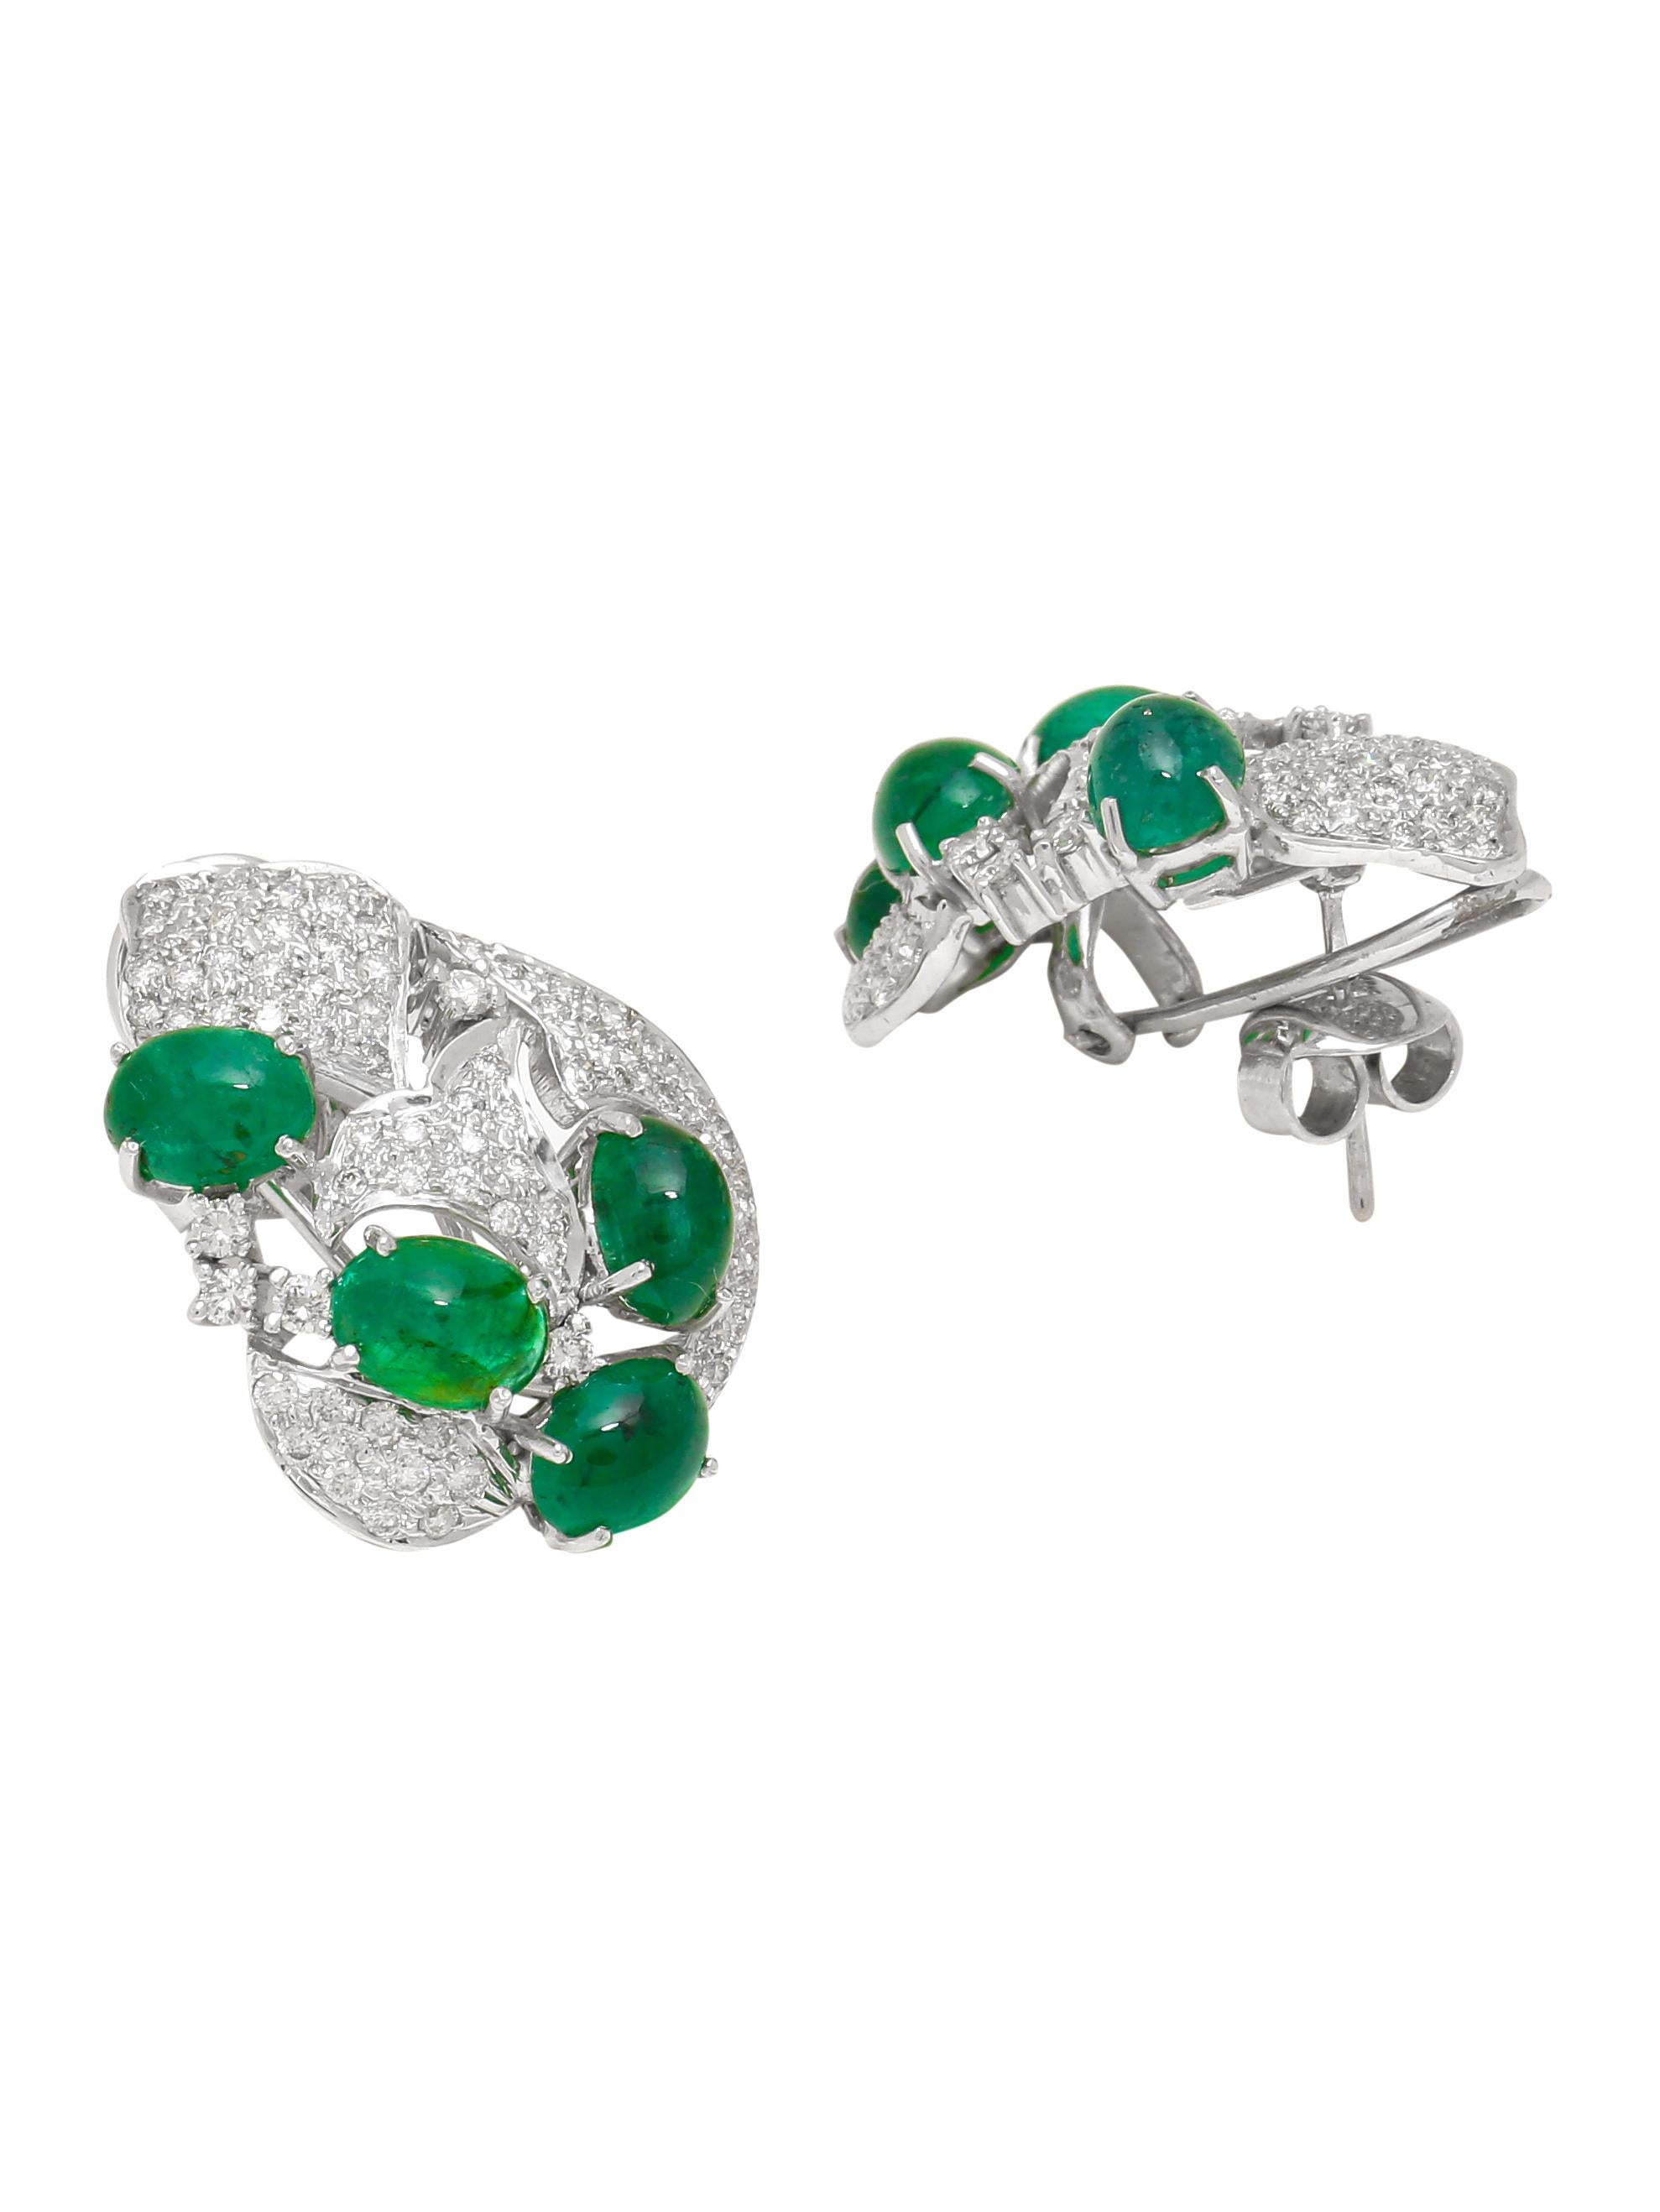 Modern Emerald Cabochon and Diamond Stud Earrings in 18 Karat White Gold For Sale